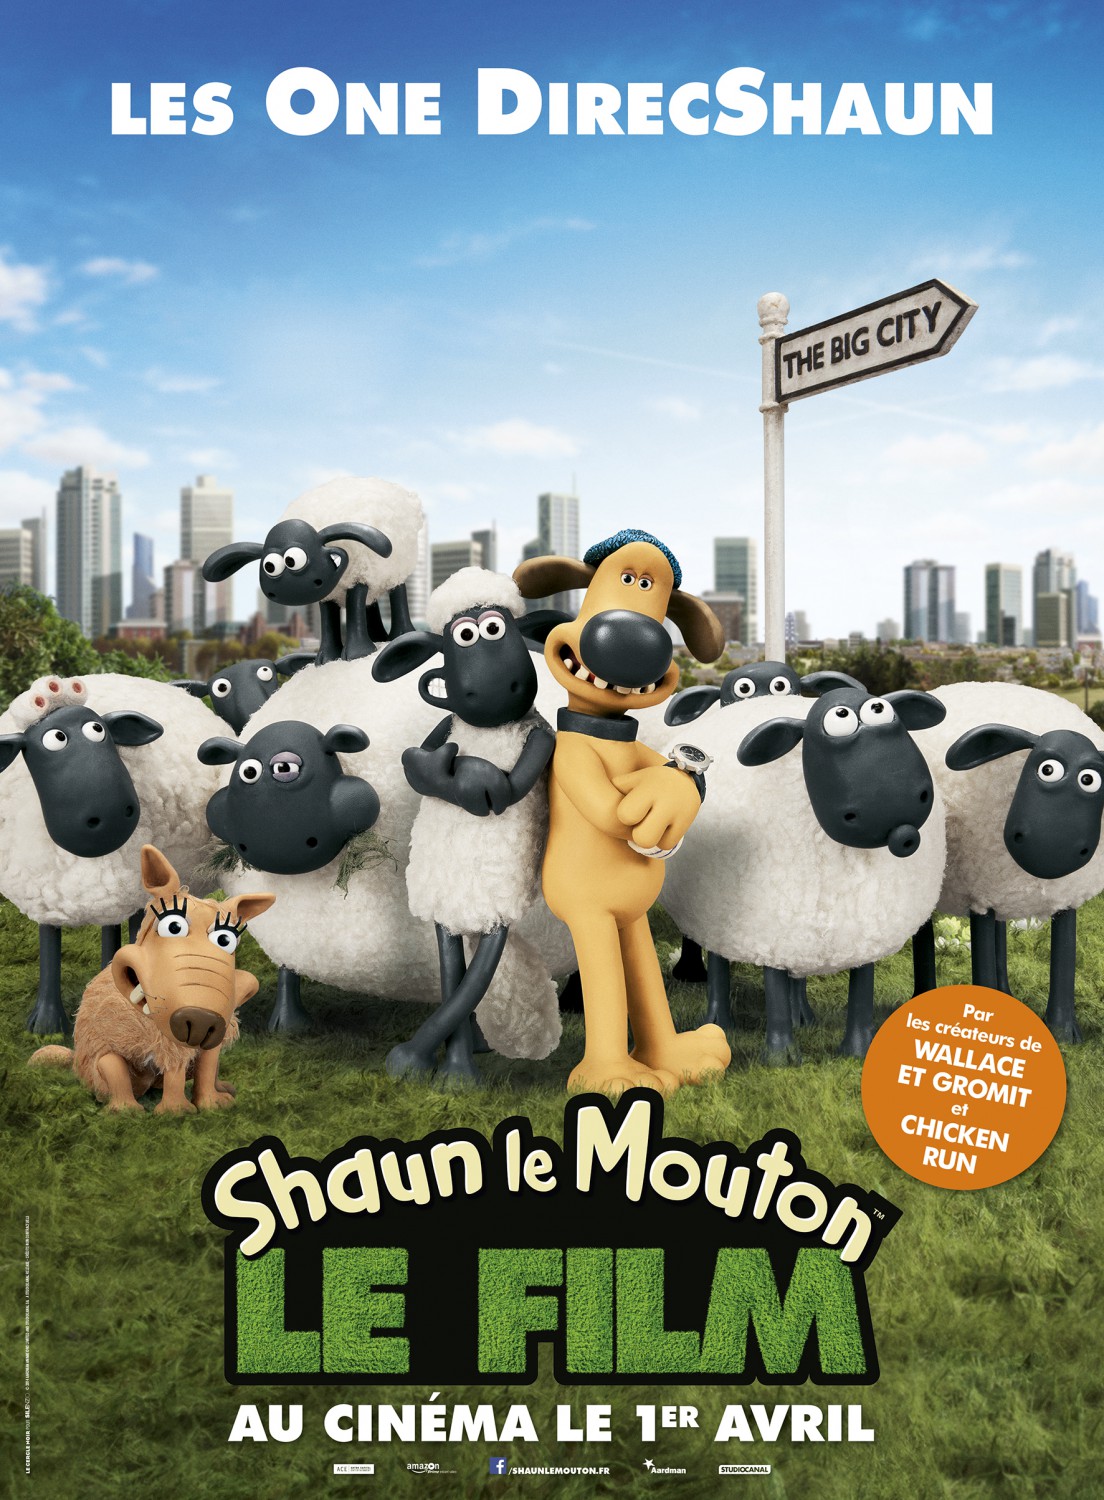 Extra Large Movie Poster Image for Shaun the Sheep (#23 of 23)